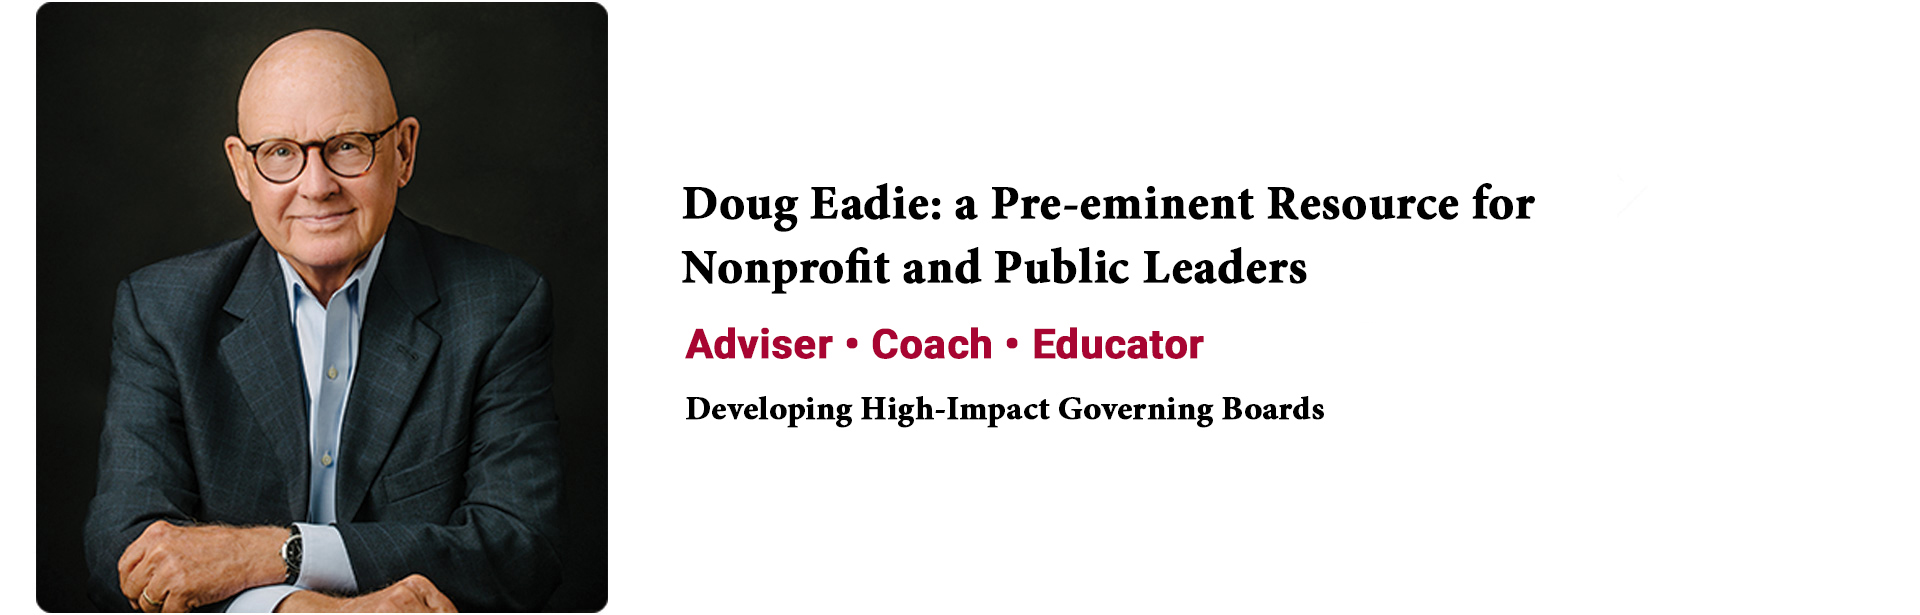 Doug Eadie - Developing High-Impact Governing Boards